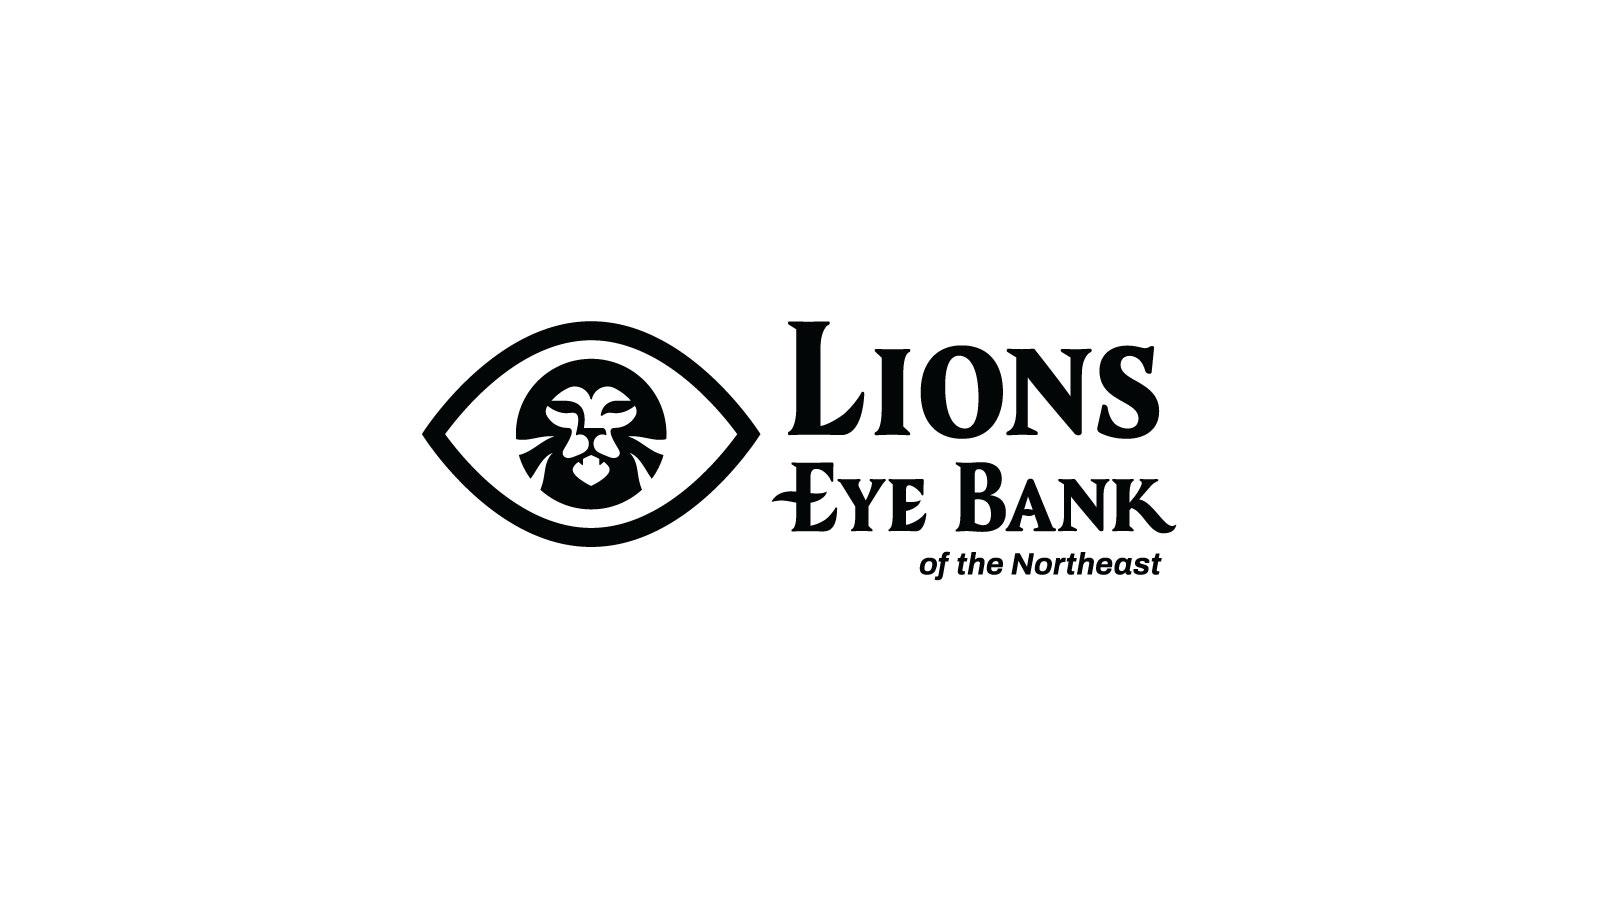 Lions Eye Bank of the Northeast | One color, black logo